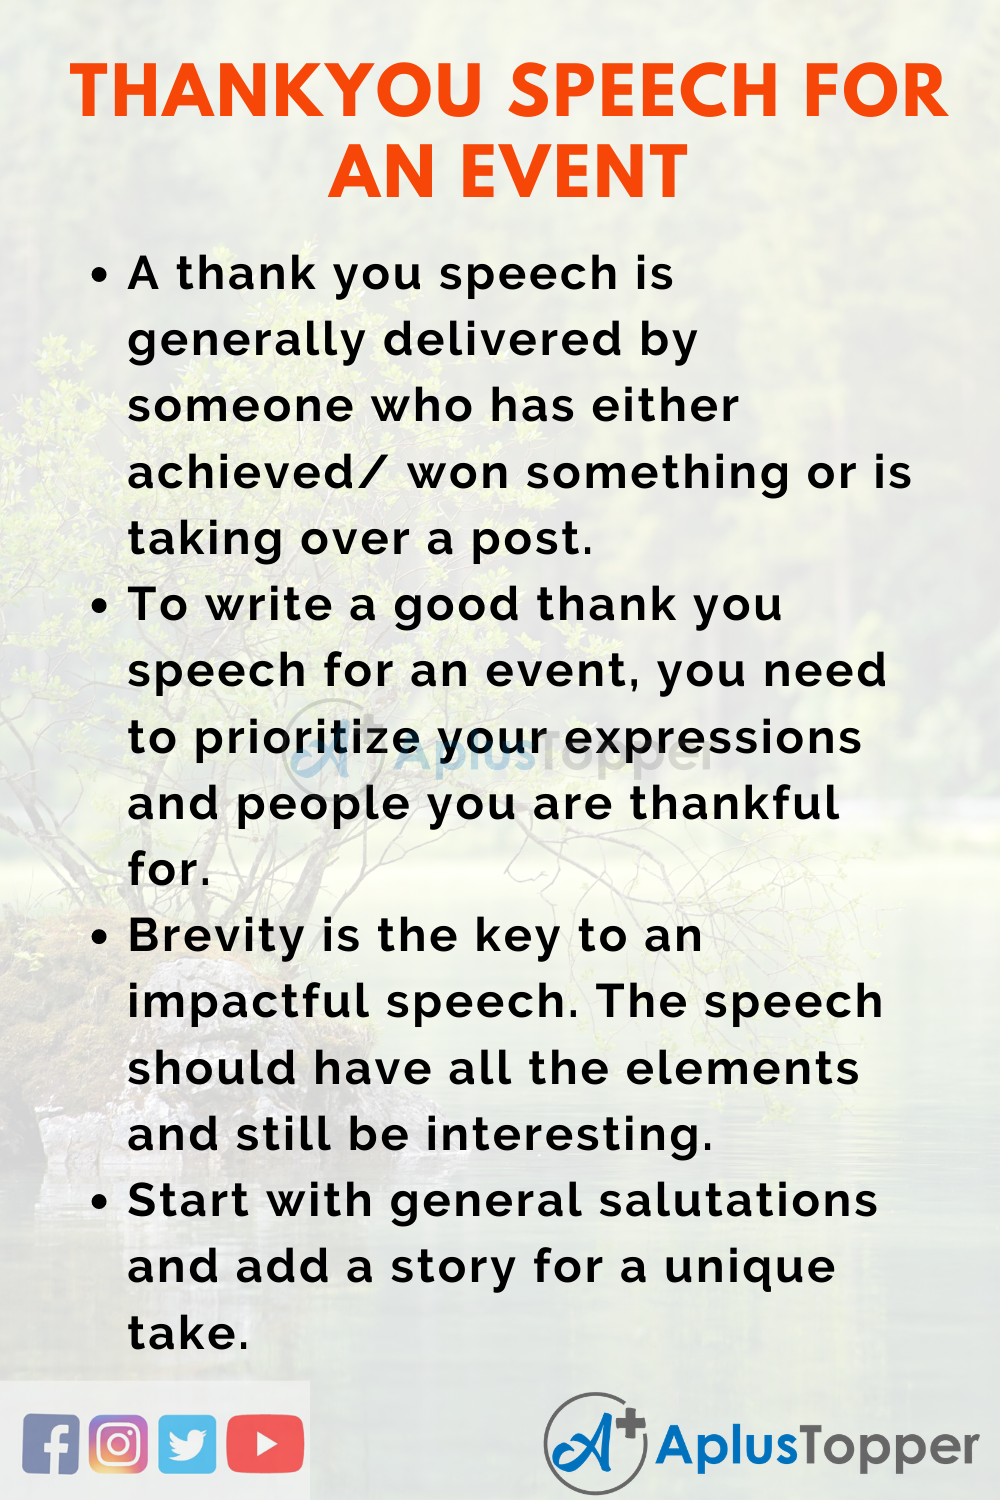 how to write a thank you speech for an event